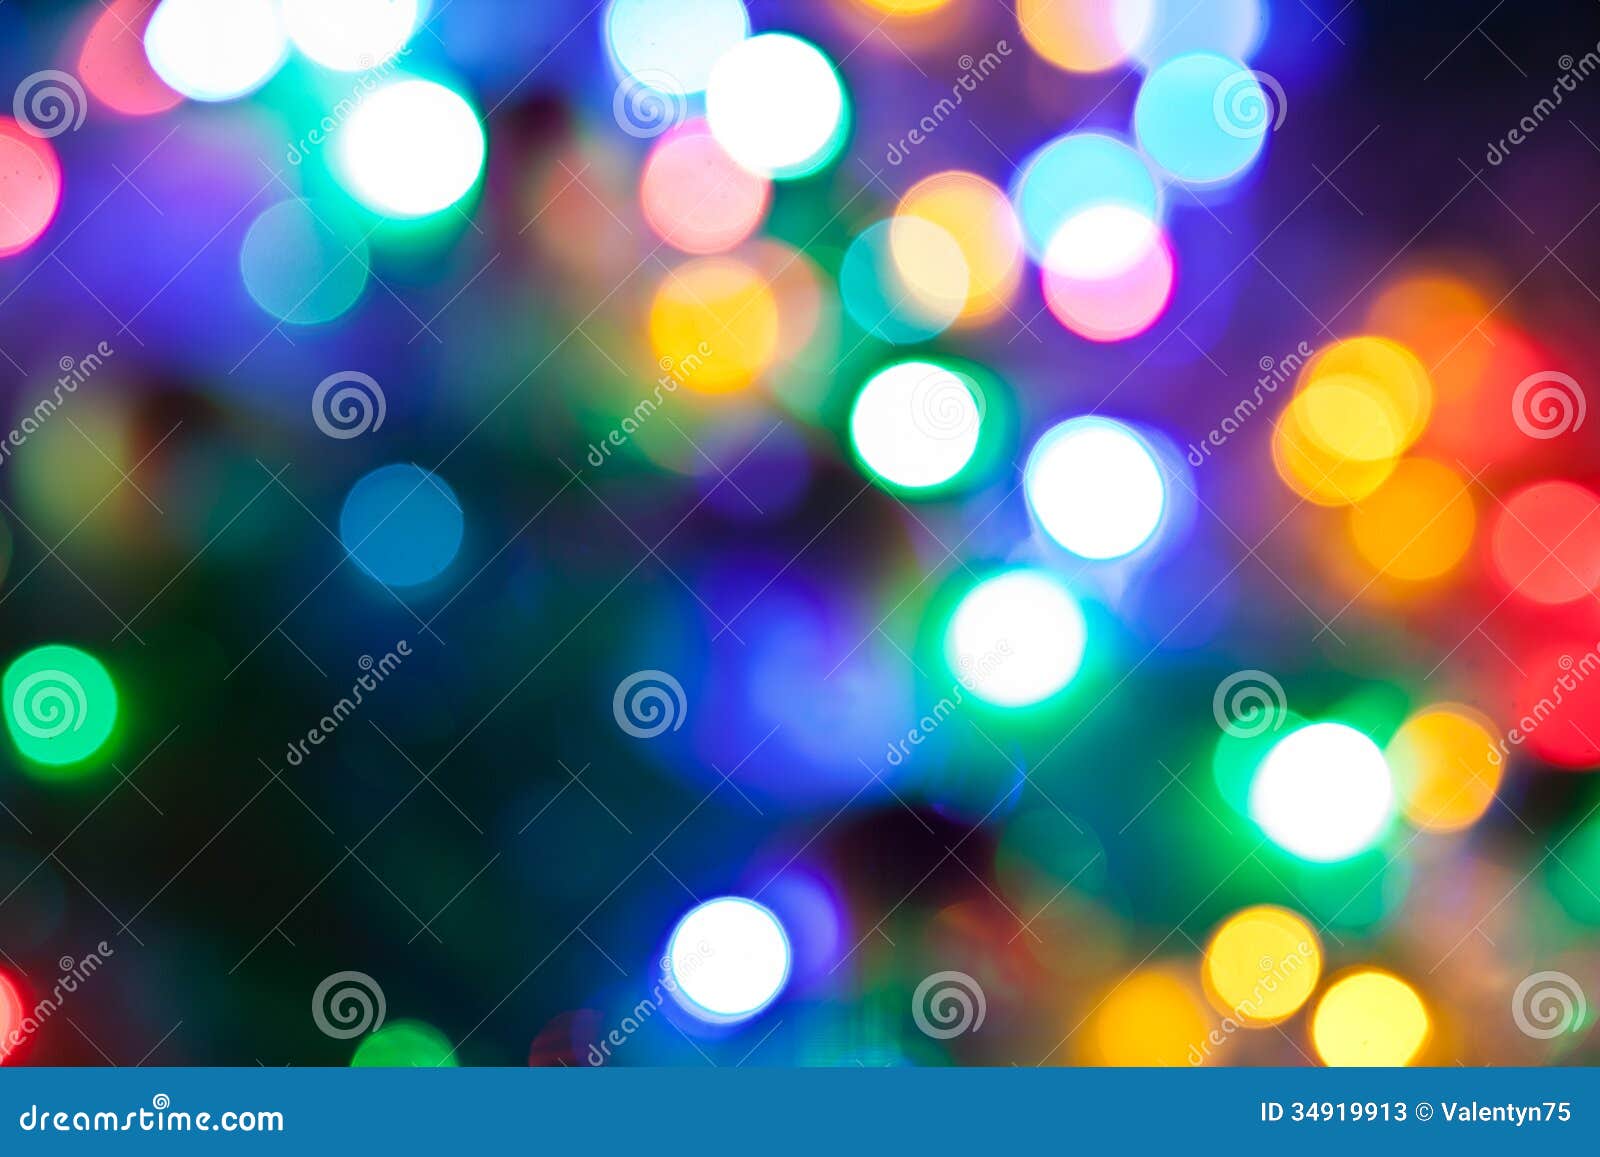 Blurred Fairy Lights Background. Stock Photos - Image: 34919913